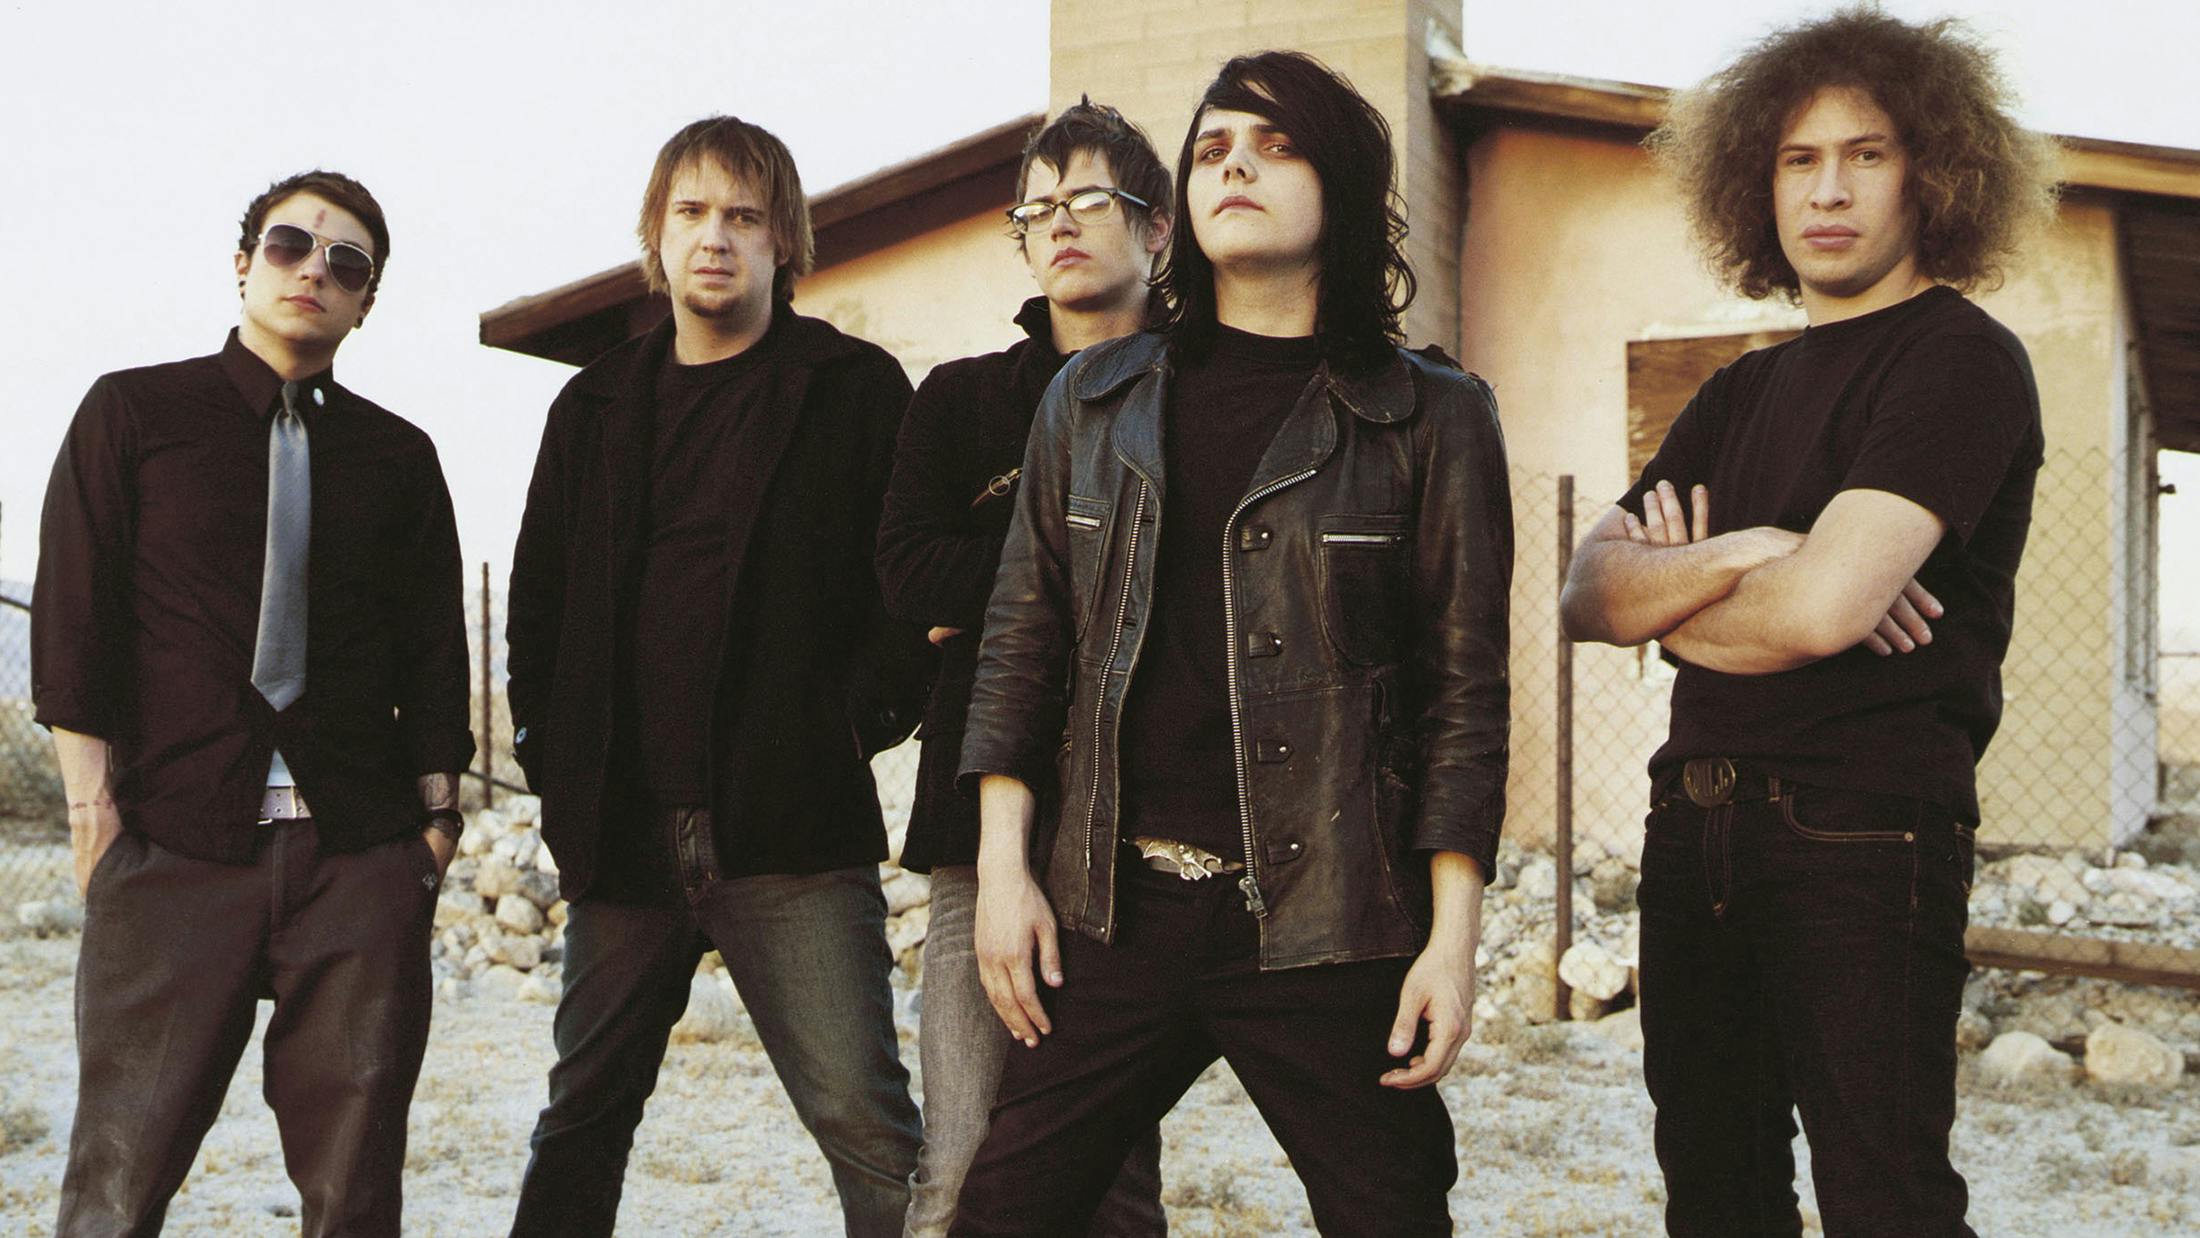 10 Moments That Made My Chemical Romance Superstars